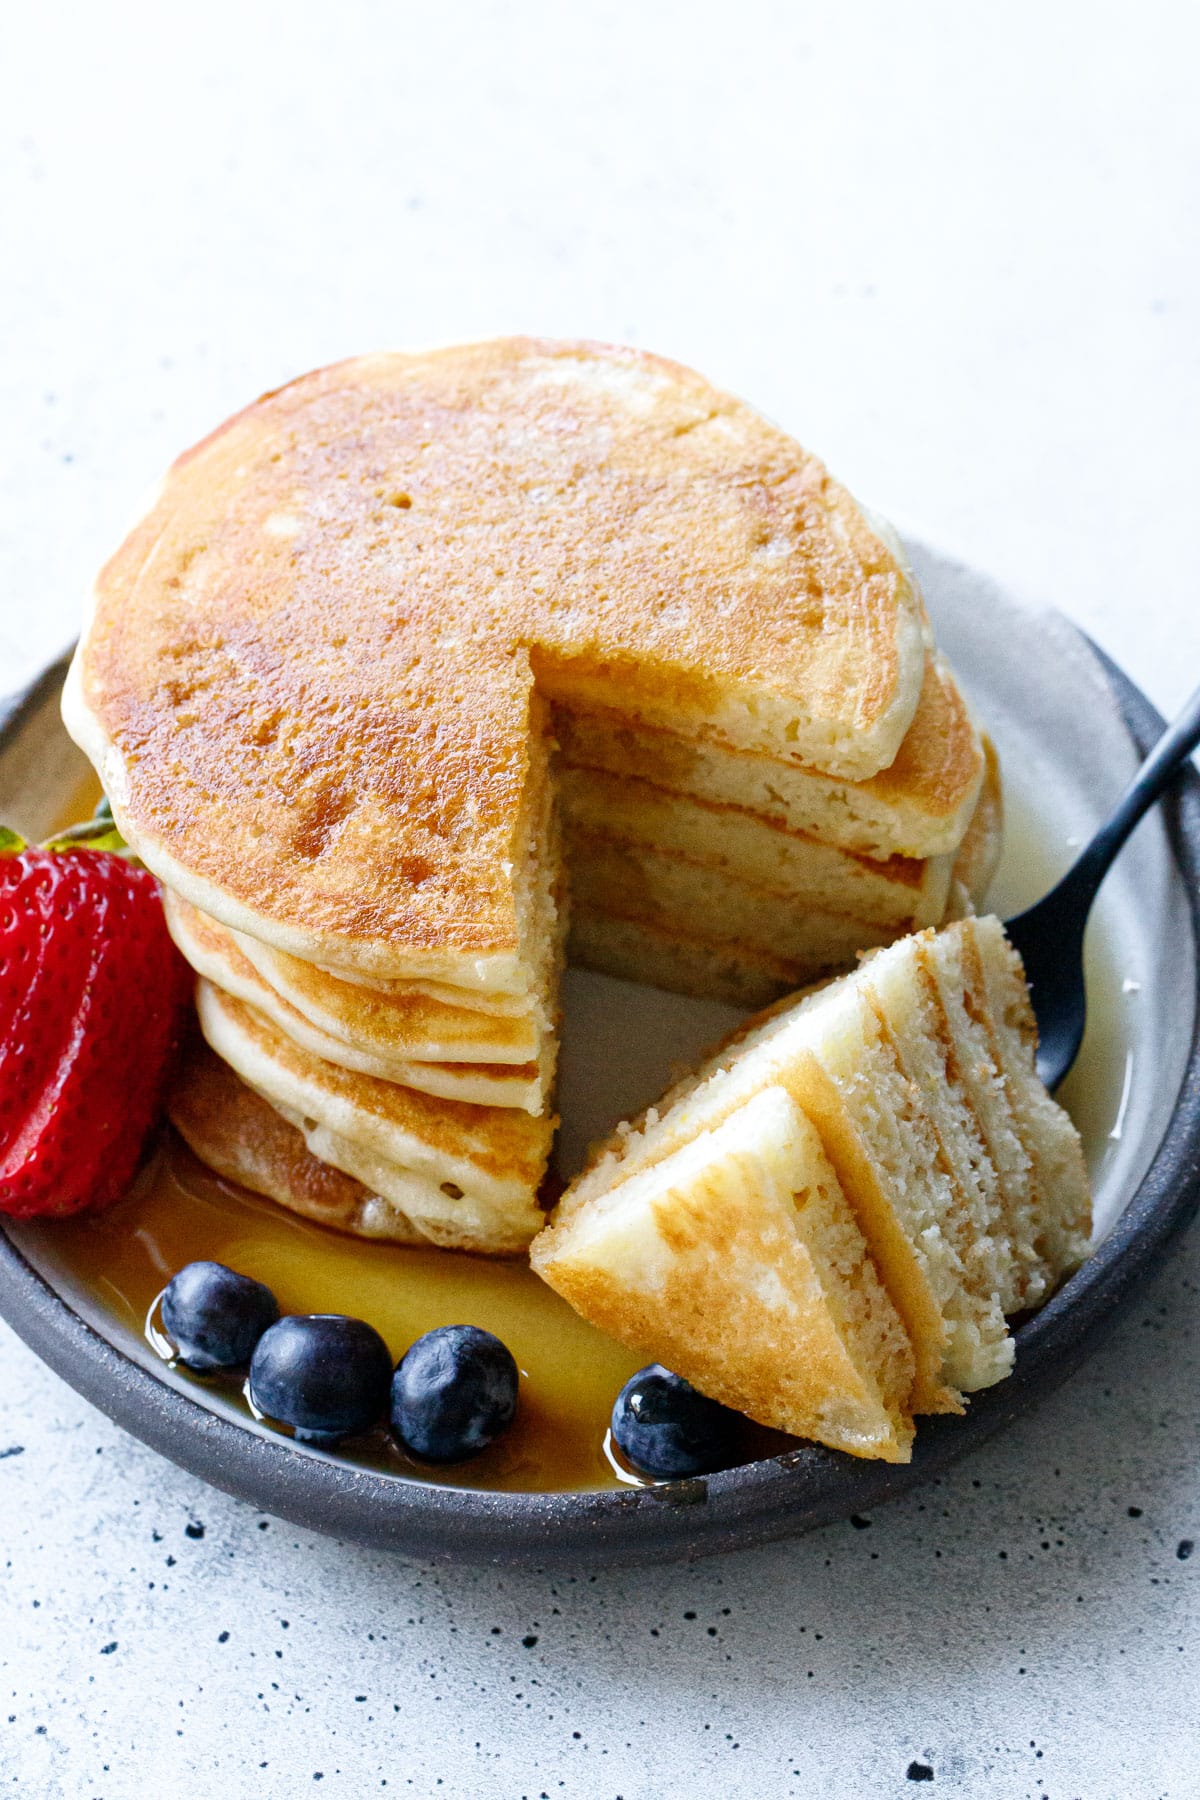 Stack of Olive Oil Pancakes with a wedge cut out on a fork to show the fluffy interior texture.